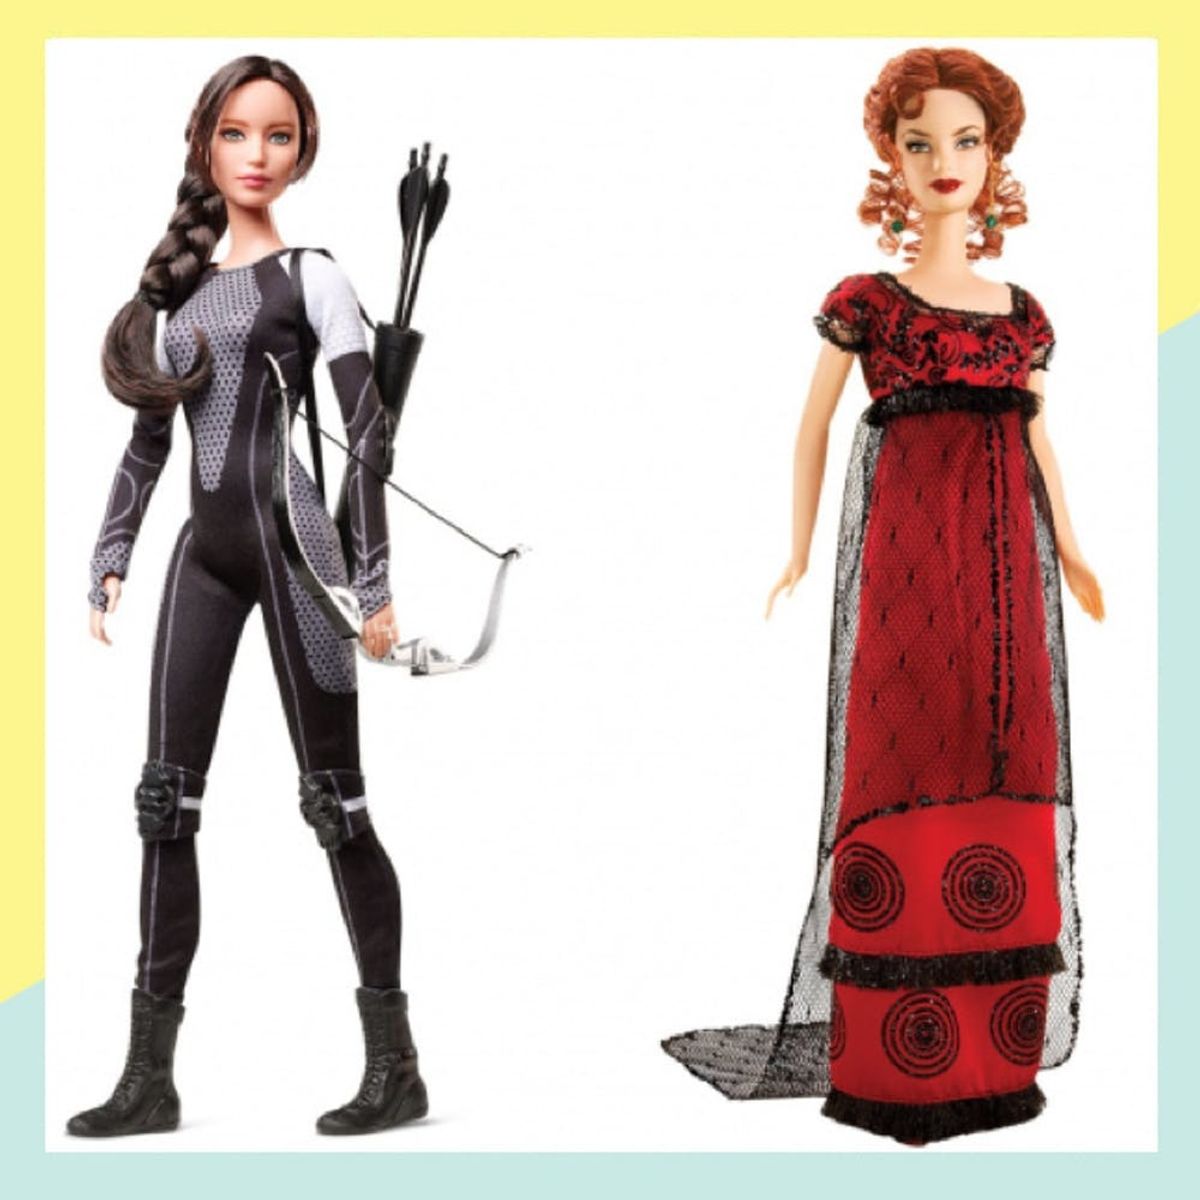 14 Celebrities Who Have Been Immortalized With Their Own Barbie Dolls